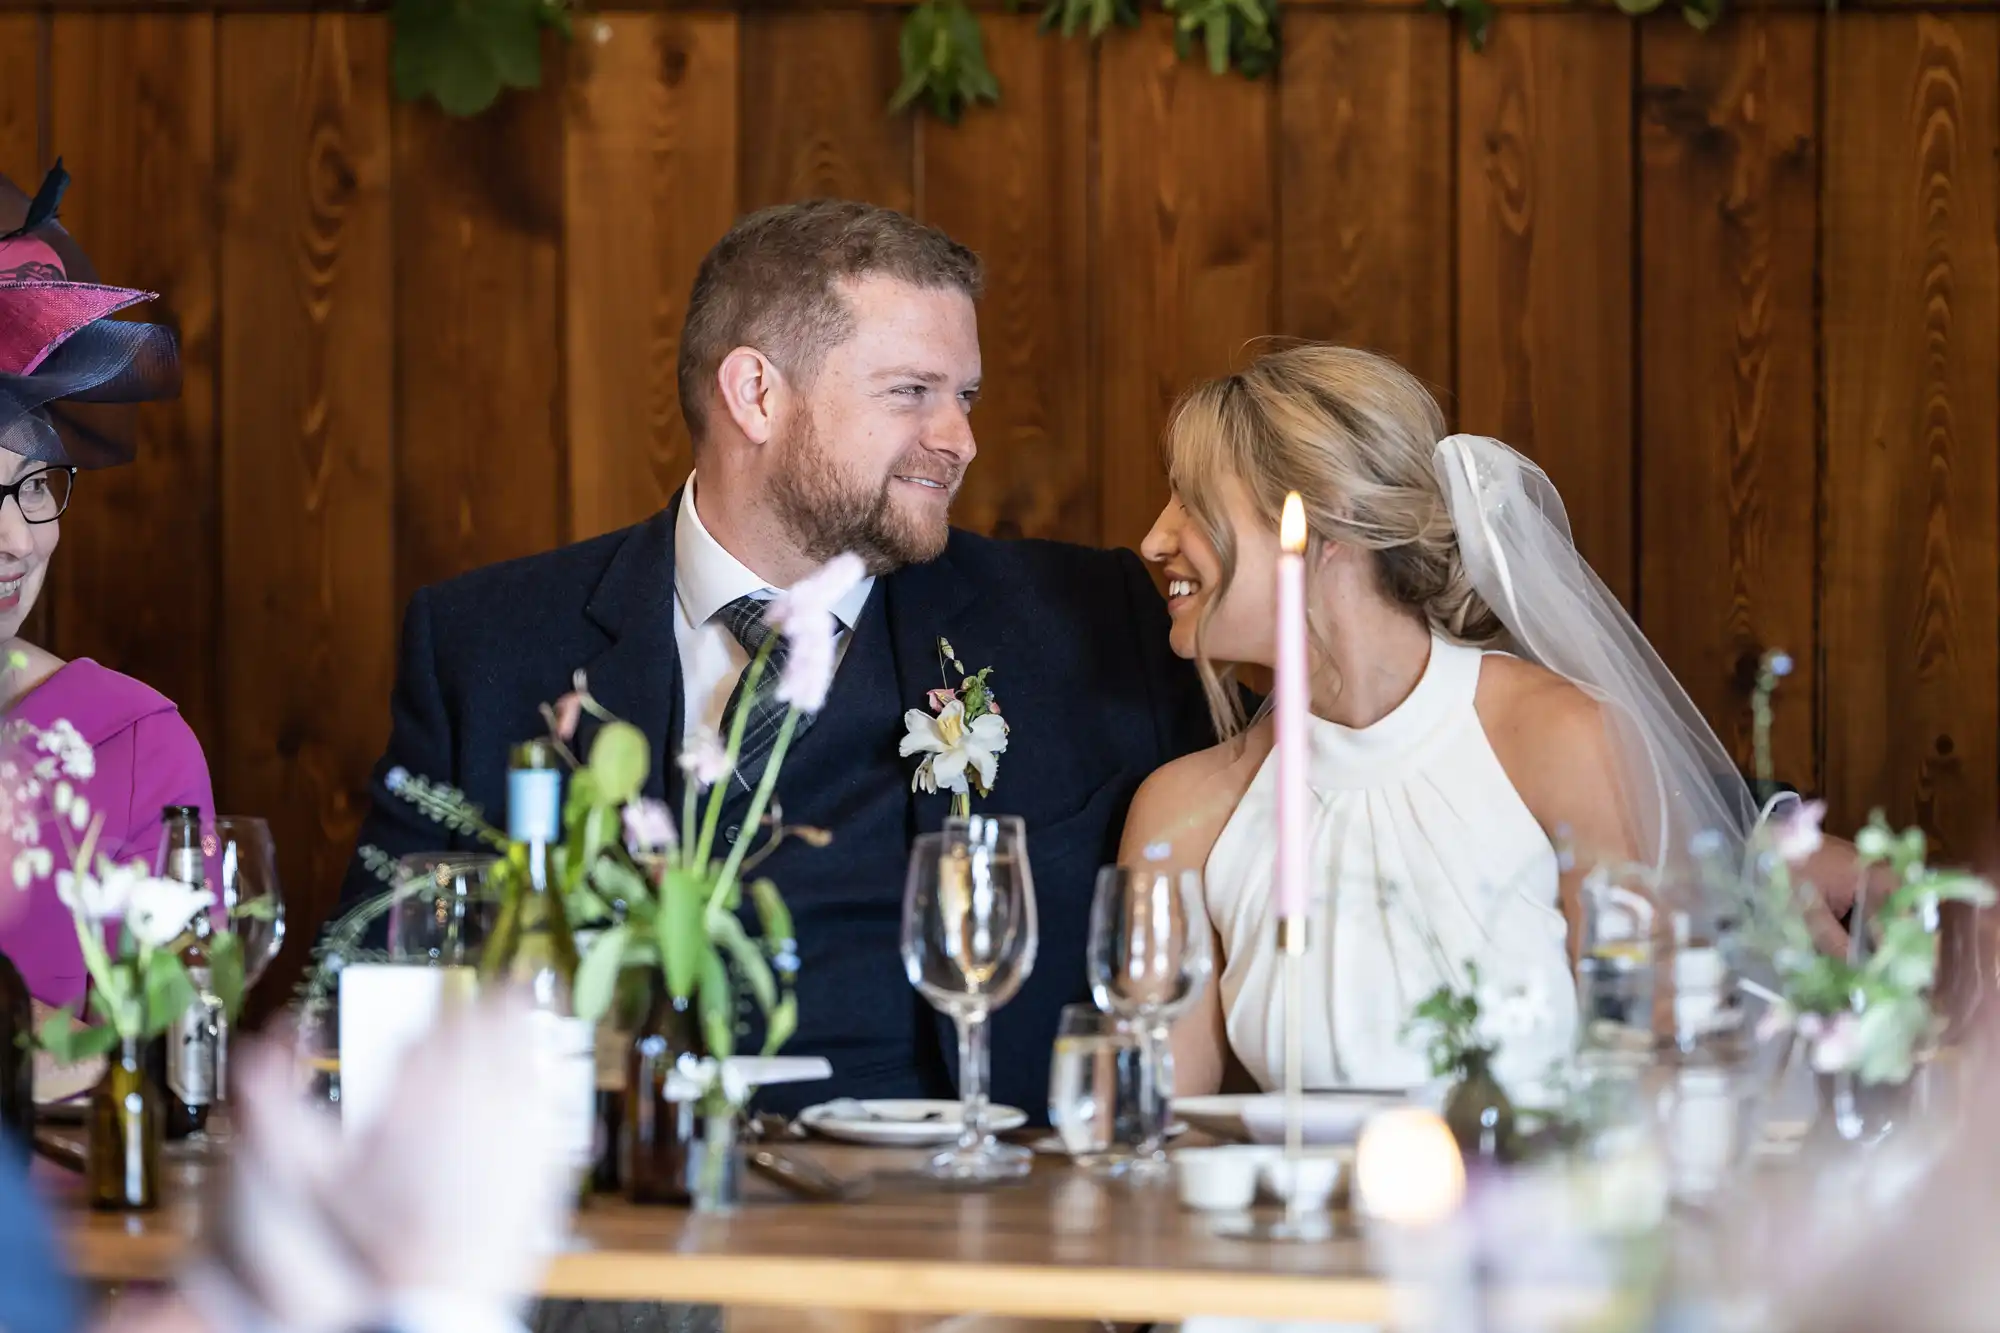 A bride and groom smiling at each other at their wedding reception table, surrounded by candles and floral decorations.